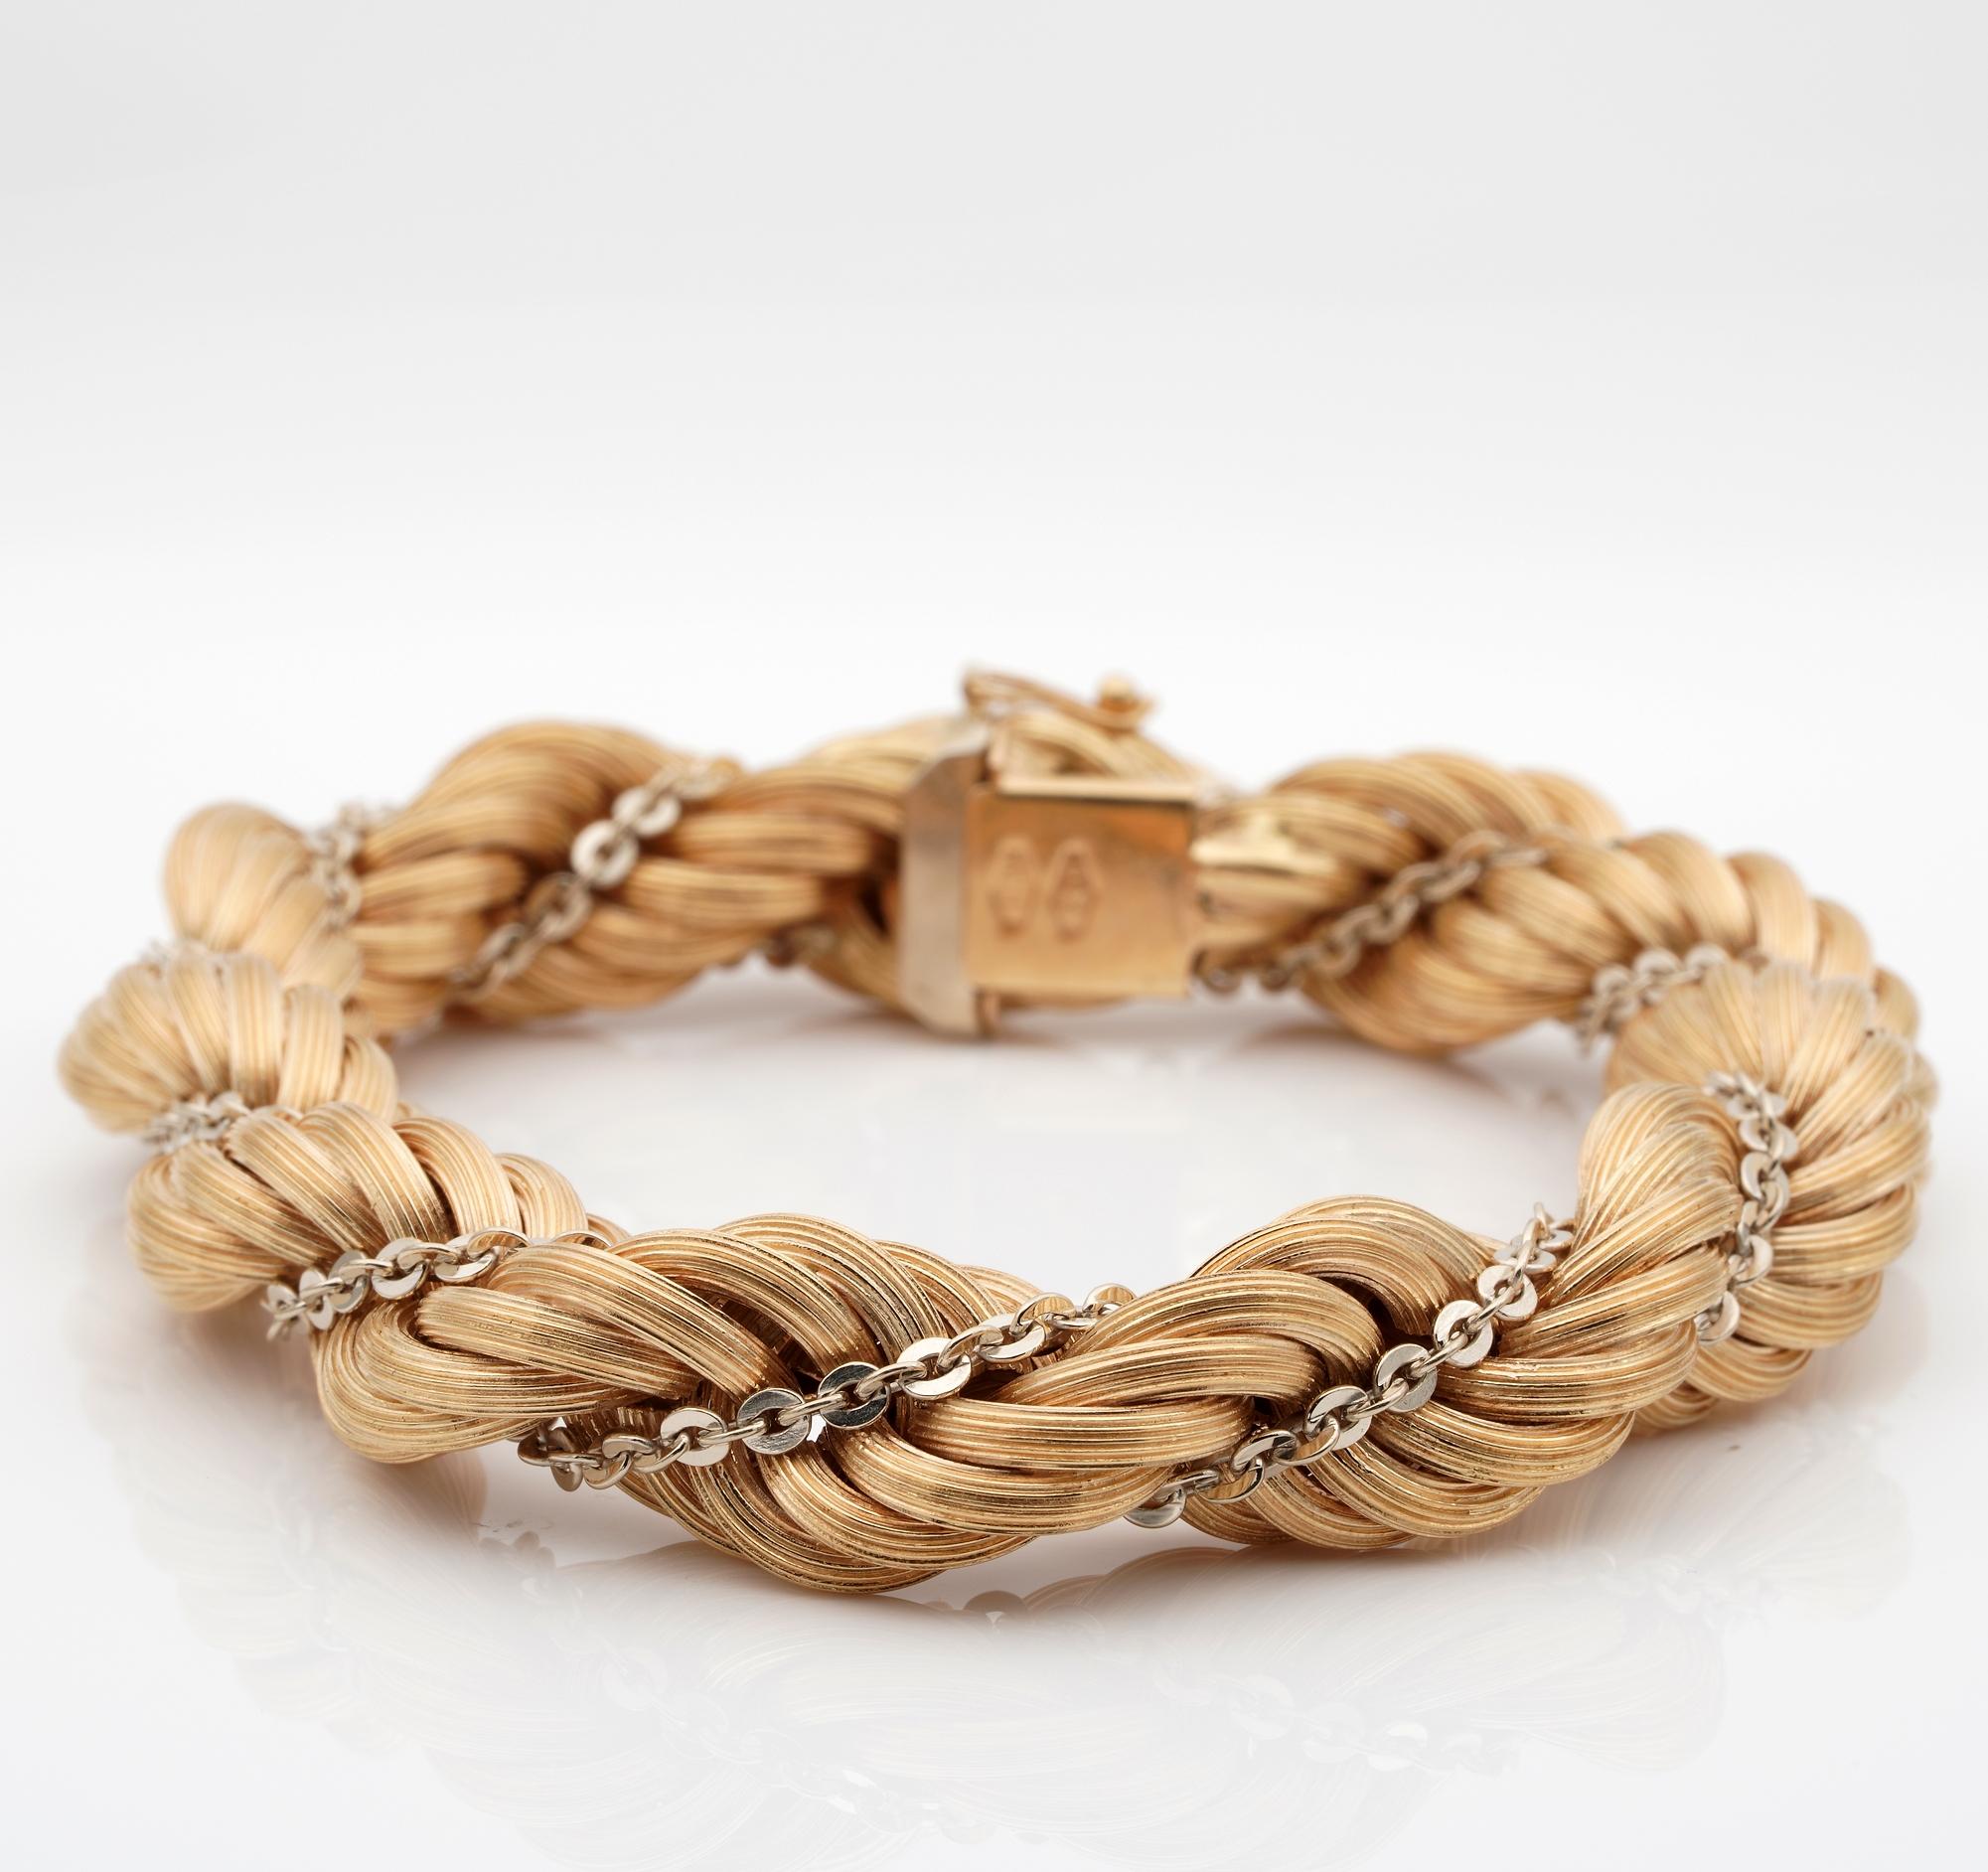 Retro Statement Piece

Big, bold, retro bracelet is the epitome of eternal elegance
Easy wear all day long, will be with you with a soft touch texture so wonderful hand made in a torsade twisted rope huge and chunky links quite outstanding 
Italian